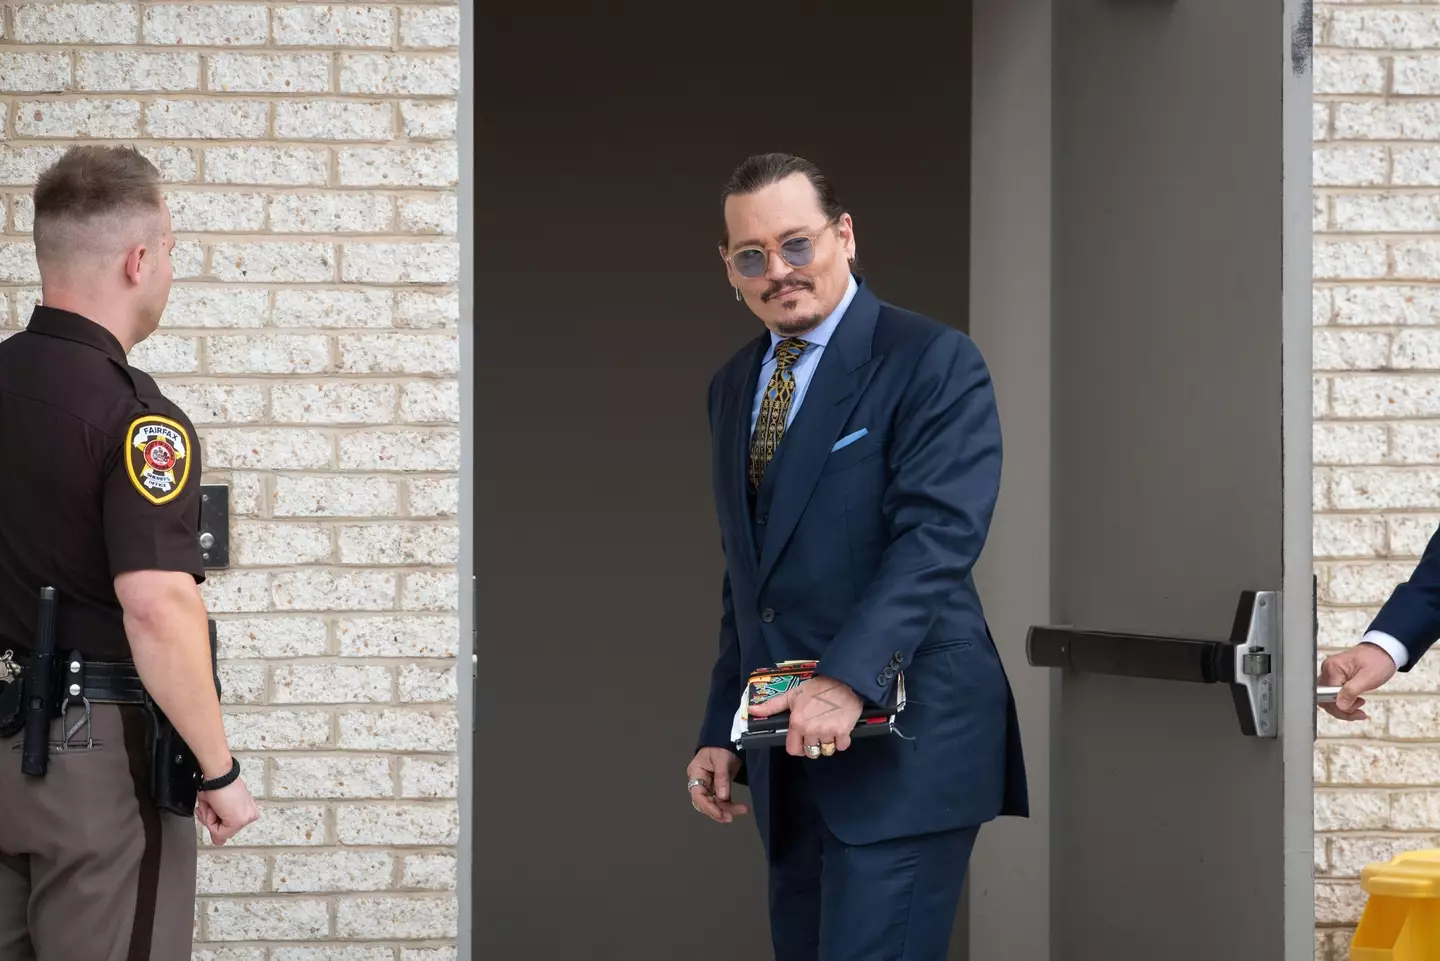 Johnny Depp has rested his case in the defamation trial against his ex-wife Amber Heard at the Fairfax County Courthouse in Virginia (Alamy).